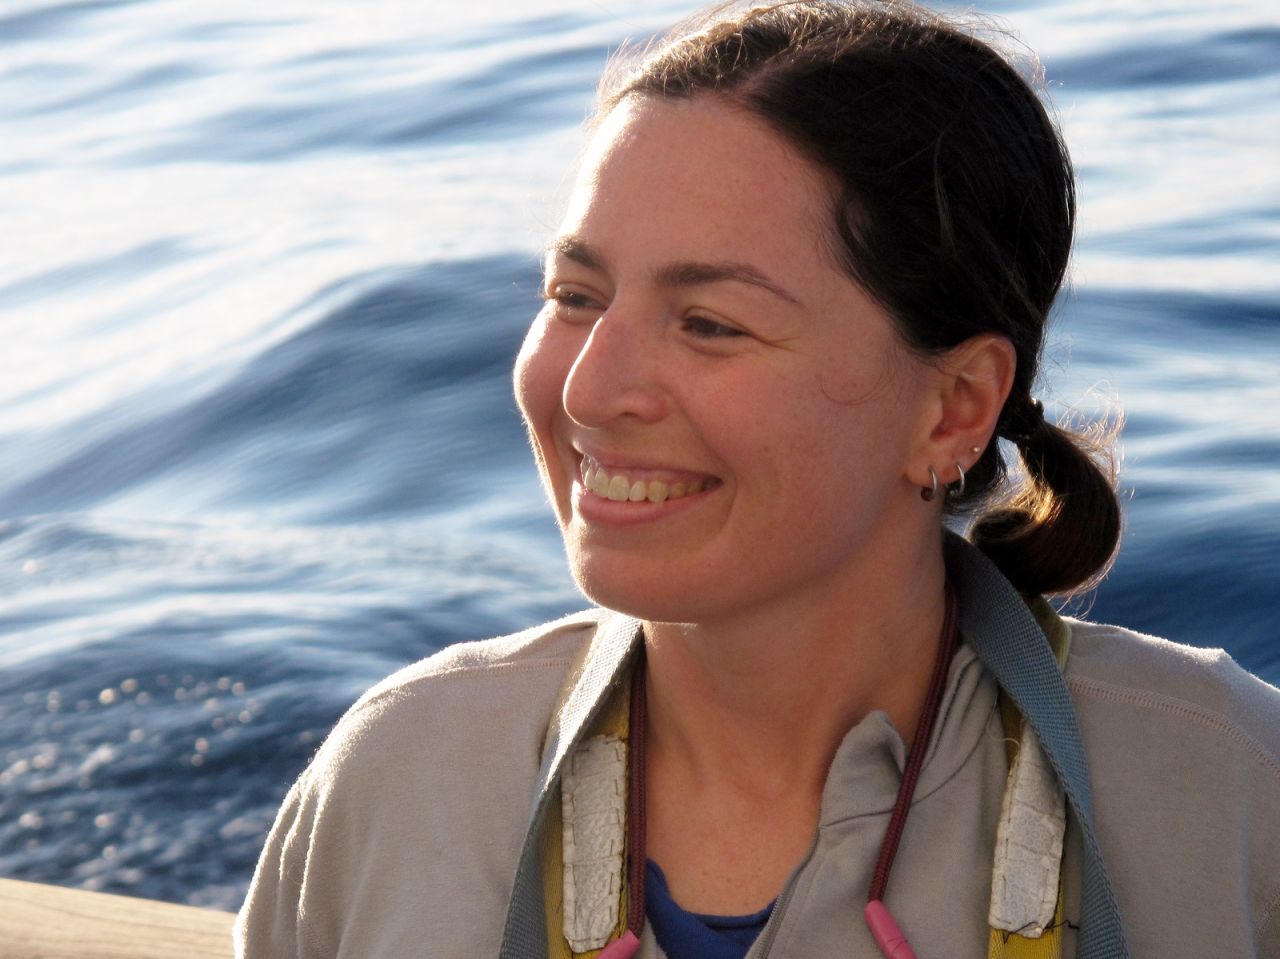 Miriam Goldstein, a Scripps Institution of Oceanography researcher has studied plastic debris in the North Pacific Ocean Subtropical Gyre, and is concerned about its potential impact on biodiversity.